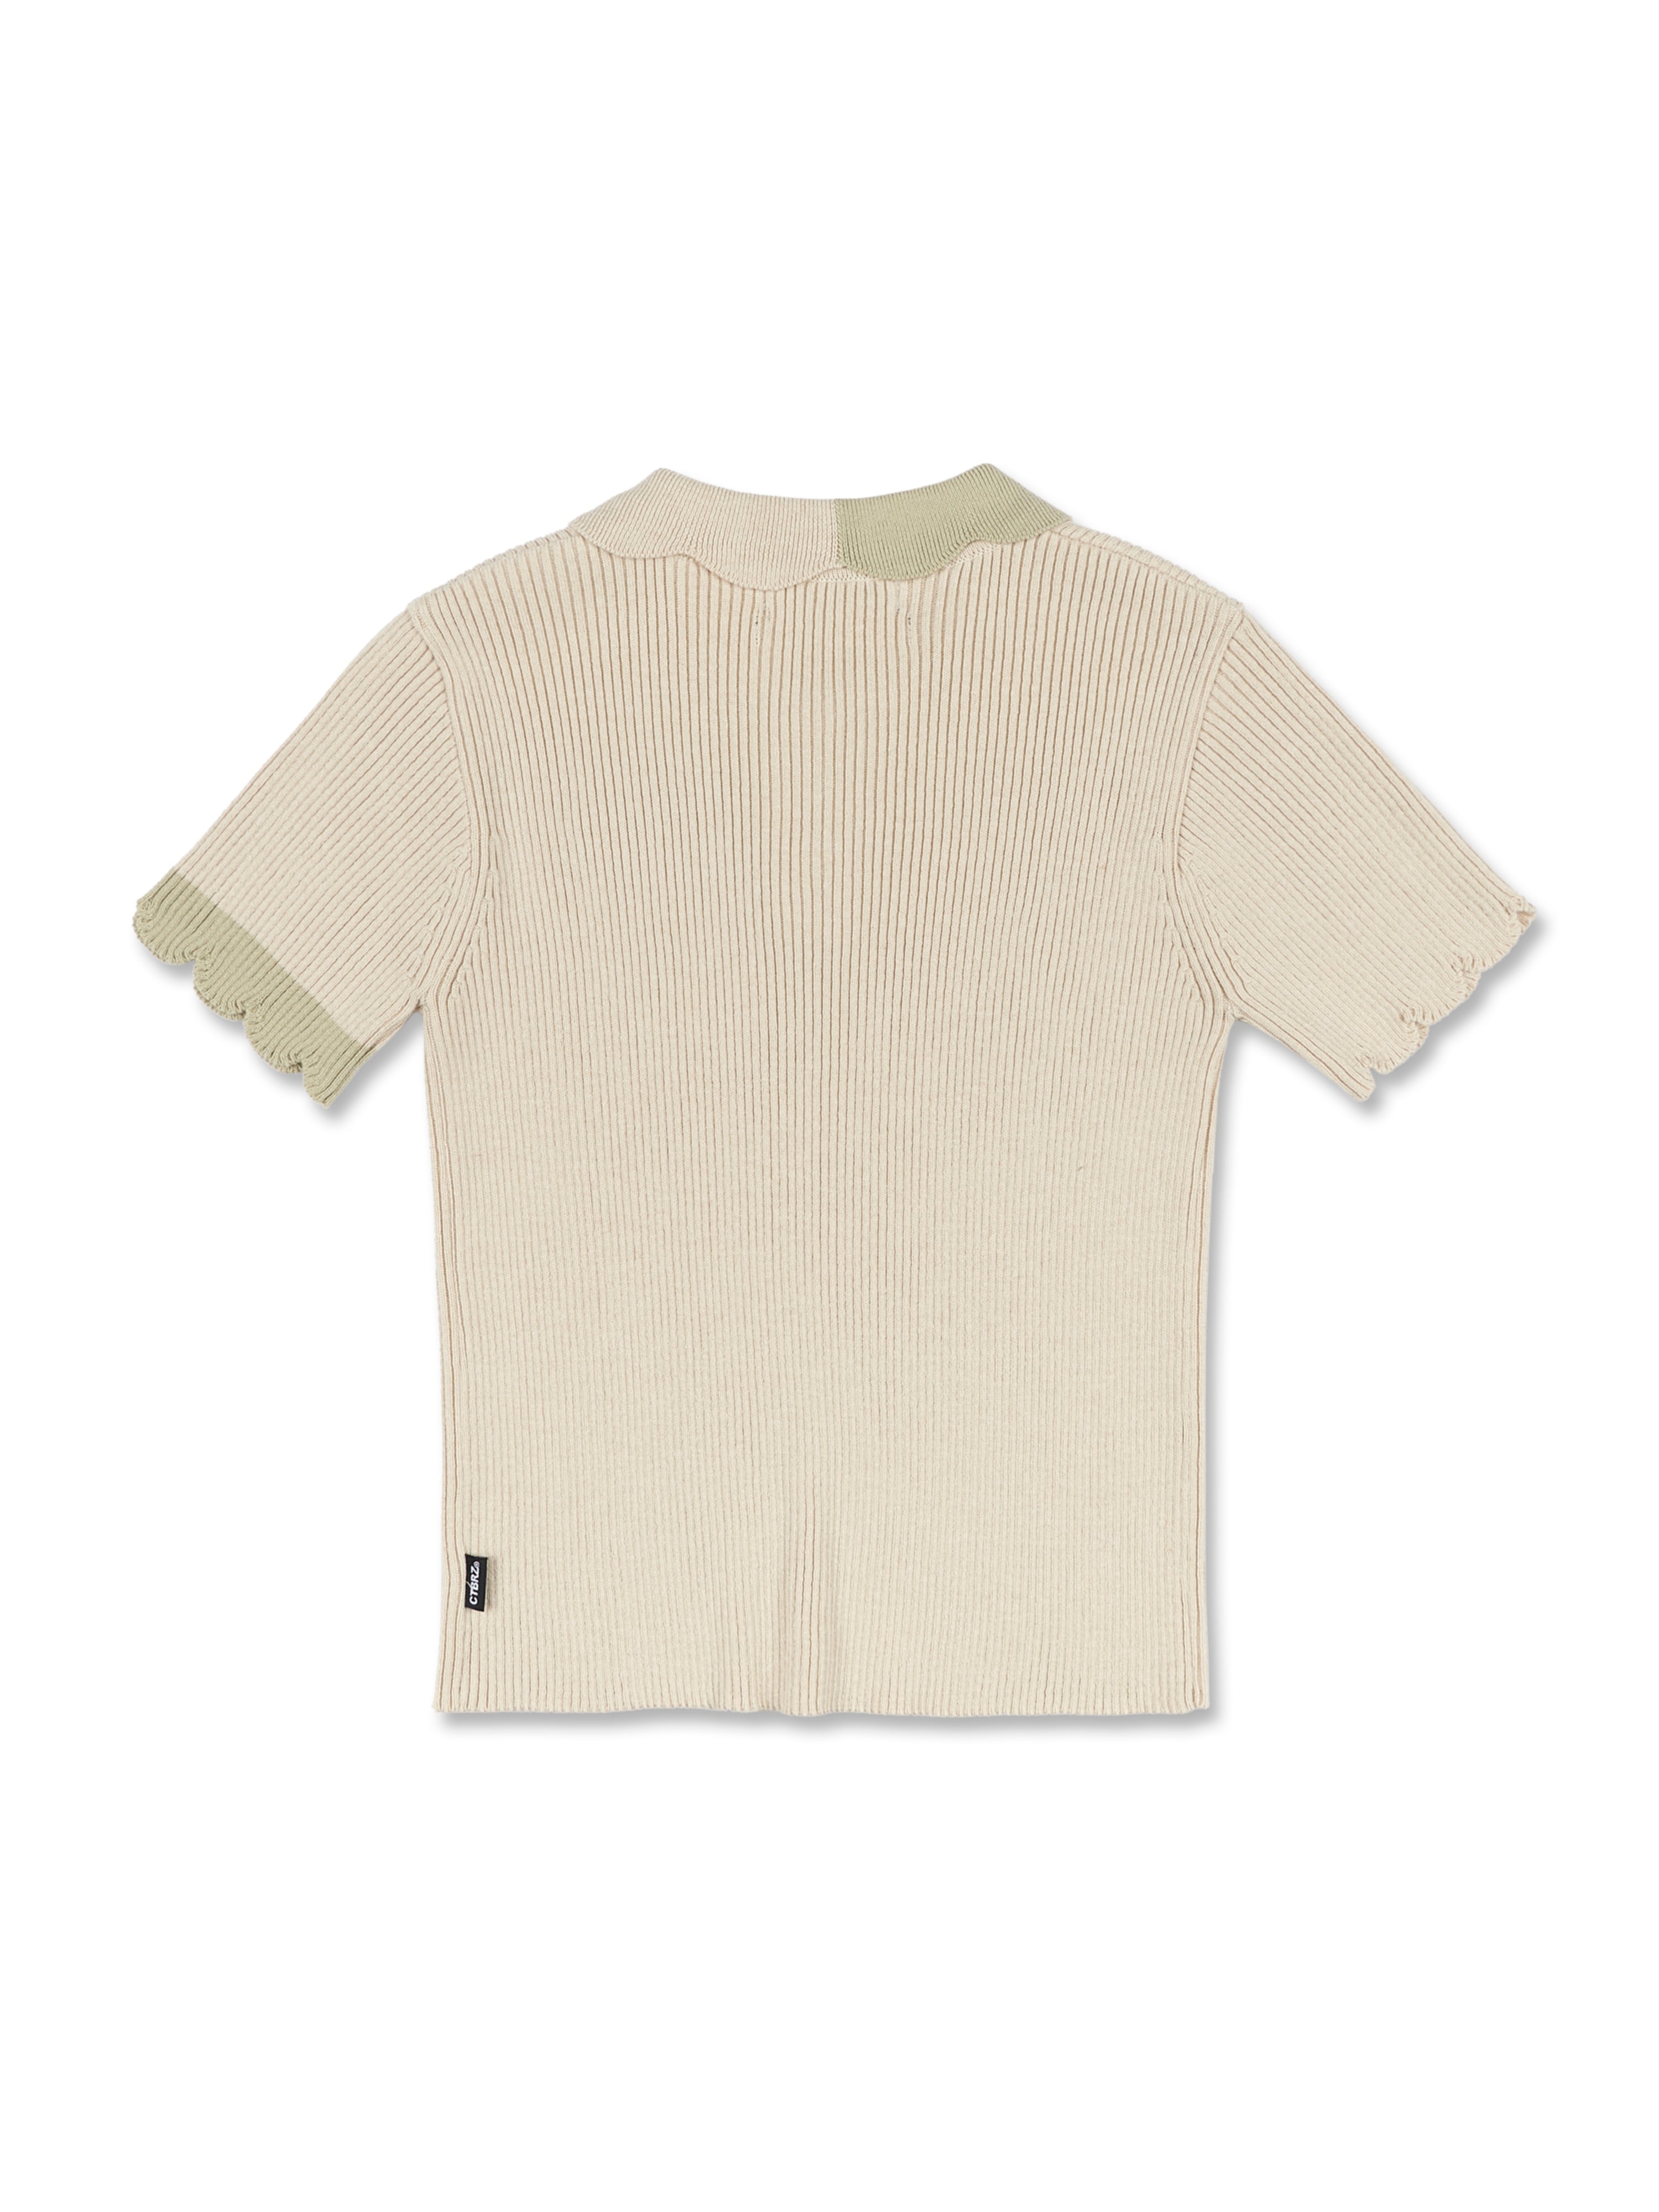 [BREEZE] Scallop Summer Knit Top_LIME (CTD1)